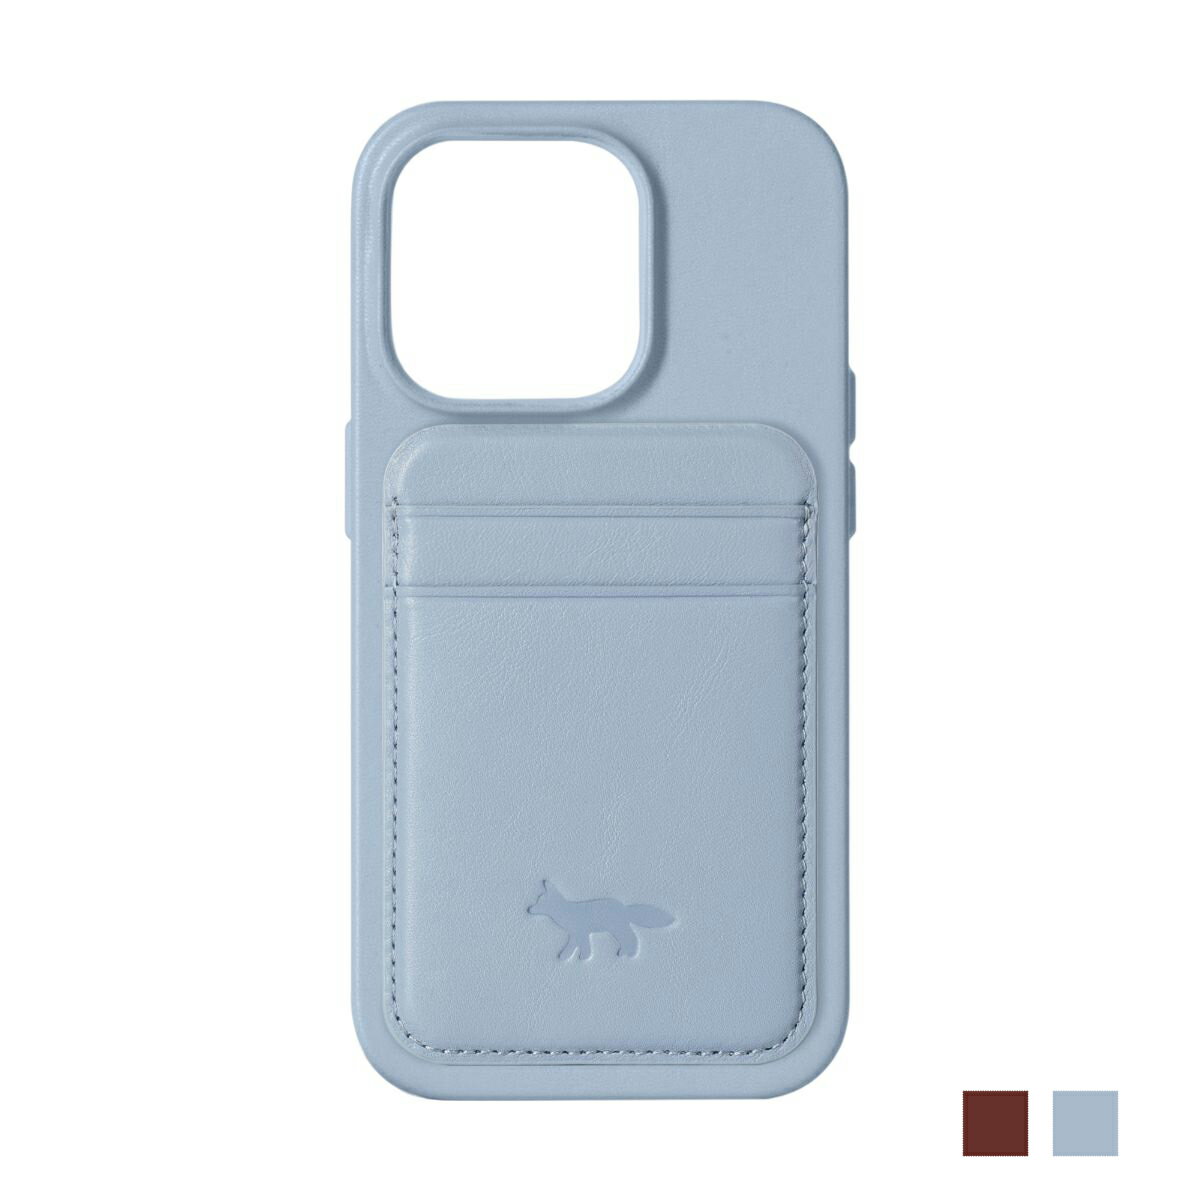 NATIVE UNION×MAISON KITSUN FW2022 TECH COLLECTION FOX MAGSAFECARD I4 PRO IPHONE CASE WITH CARD HOLDER ネイティブユニオン × メゾンキツネ アイフォンケース カードホルダー I PHONE LEATHER COLLECTION 革 レザー キツネ GIFT ギフト プレゼント PRESENT